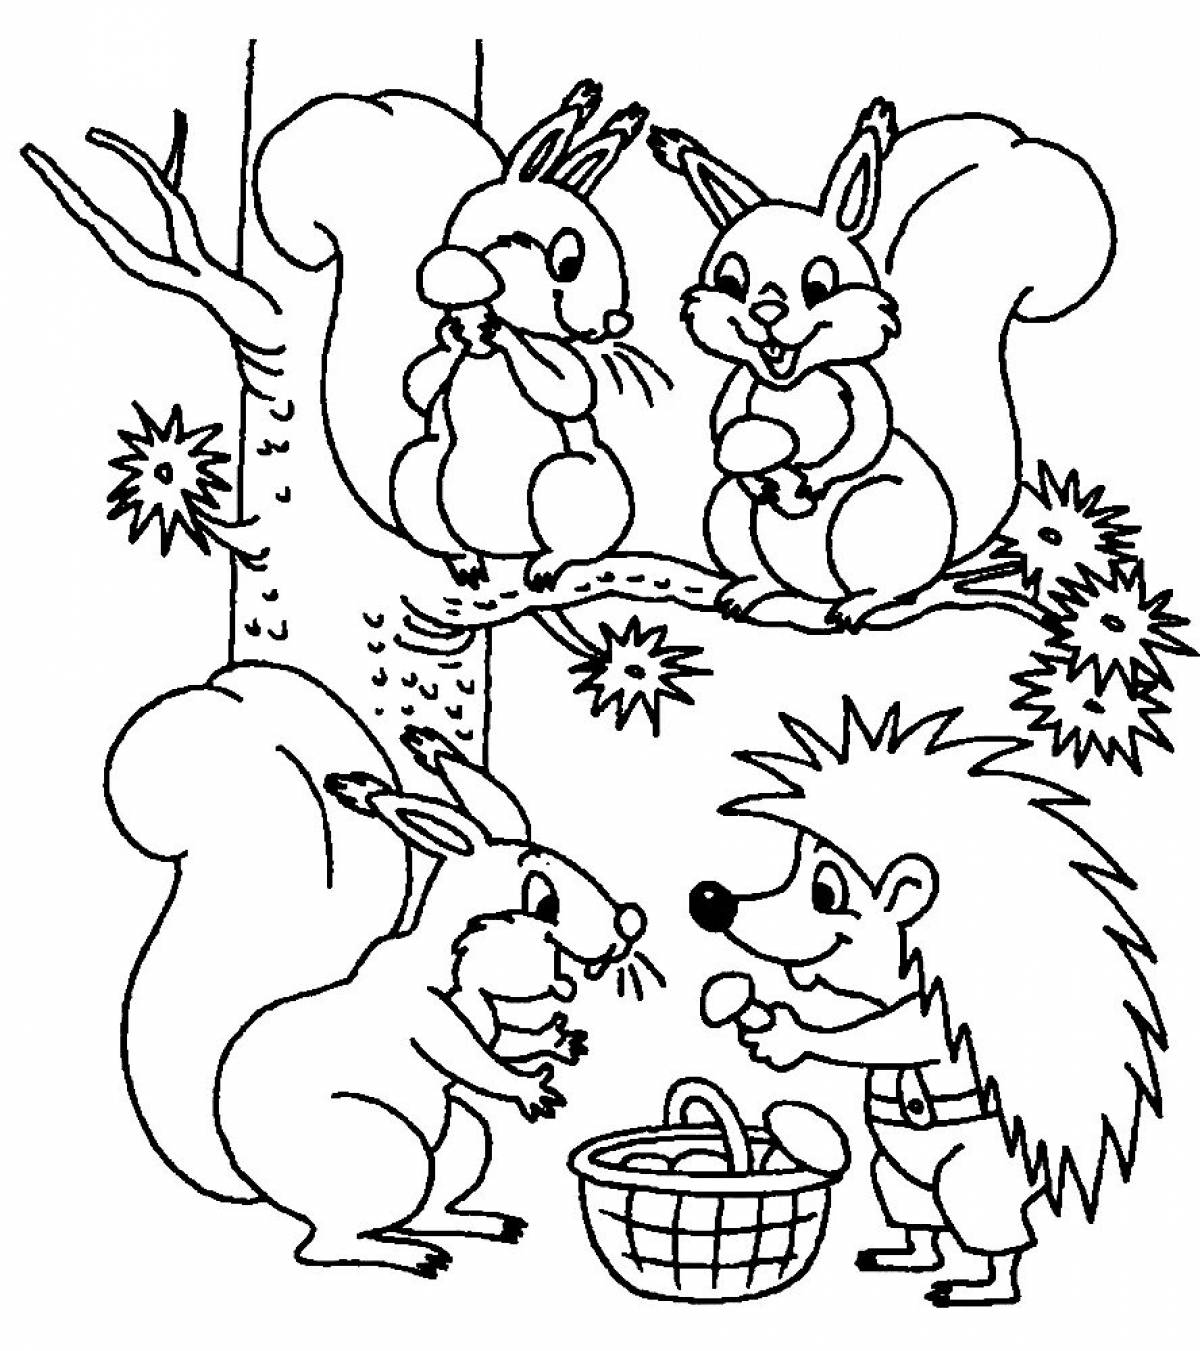 Leisure Cabin Coloring Page